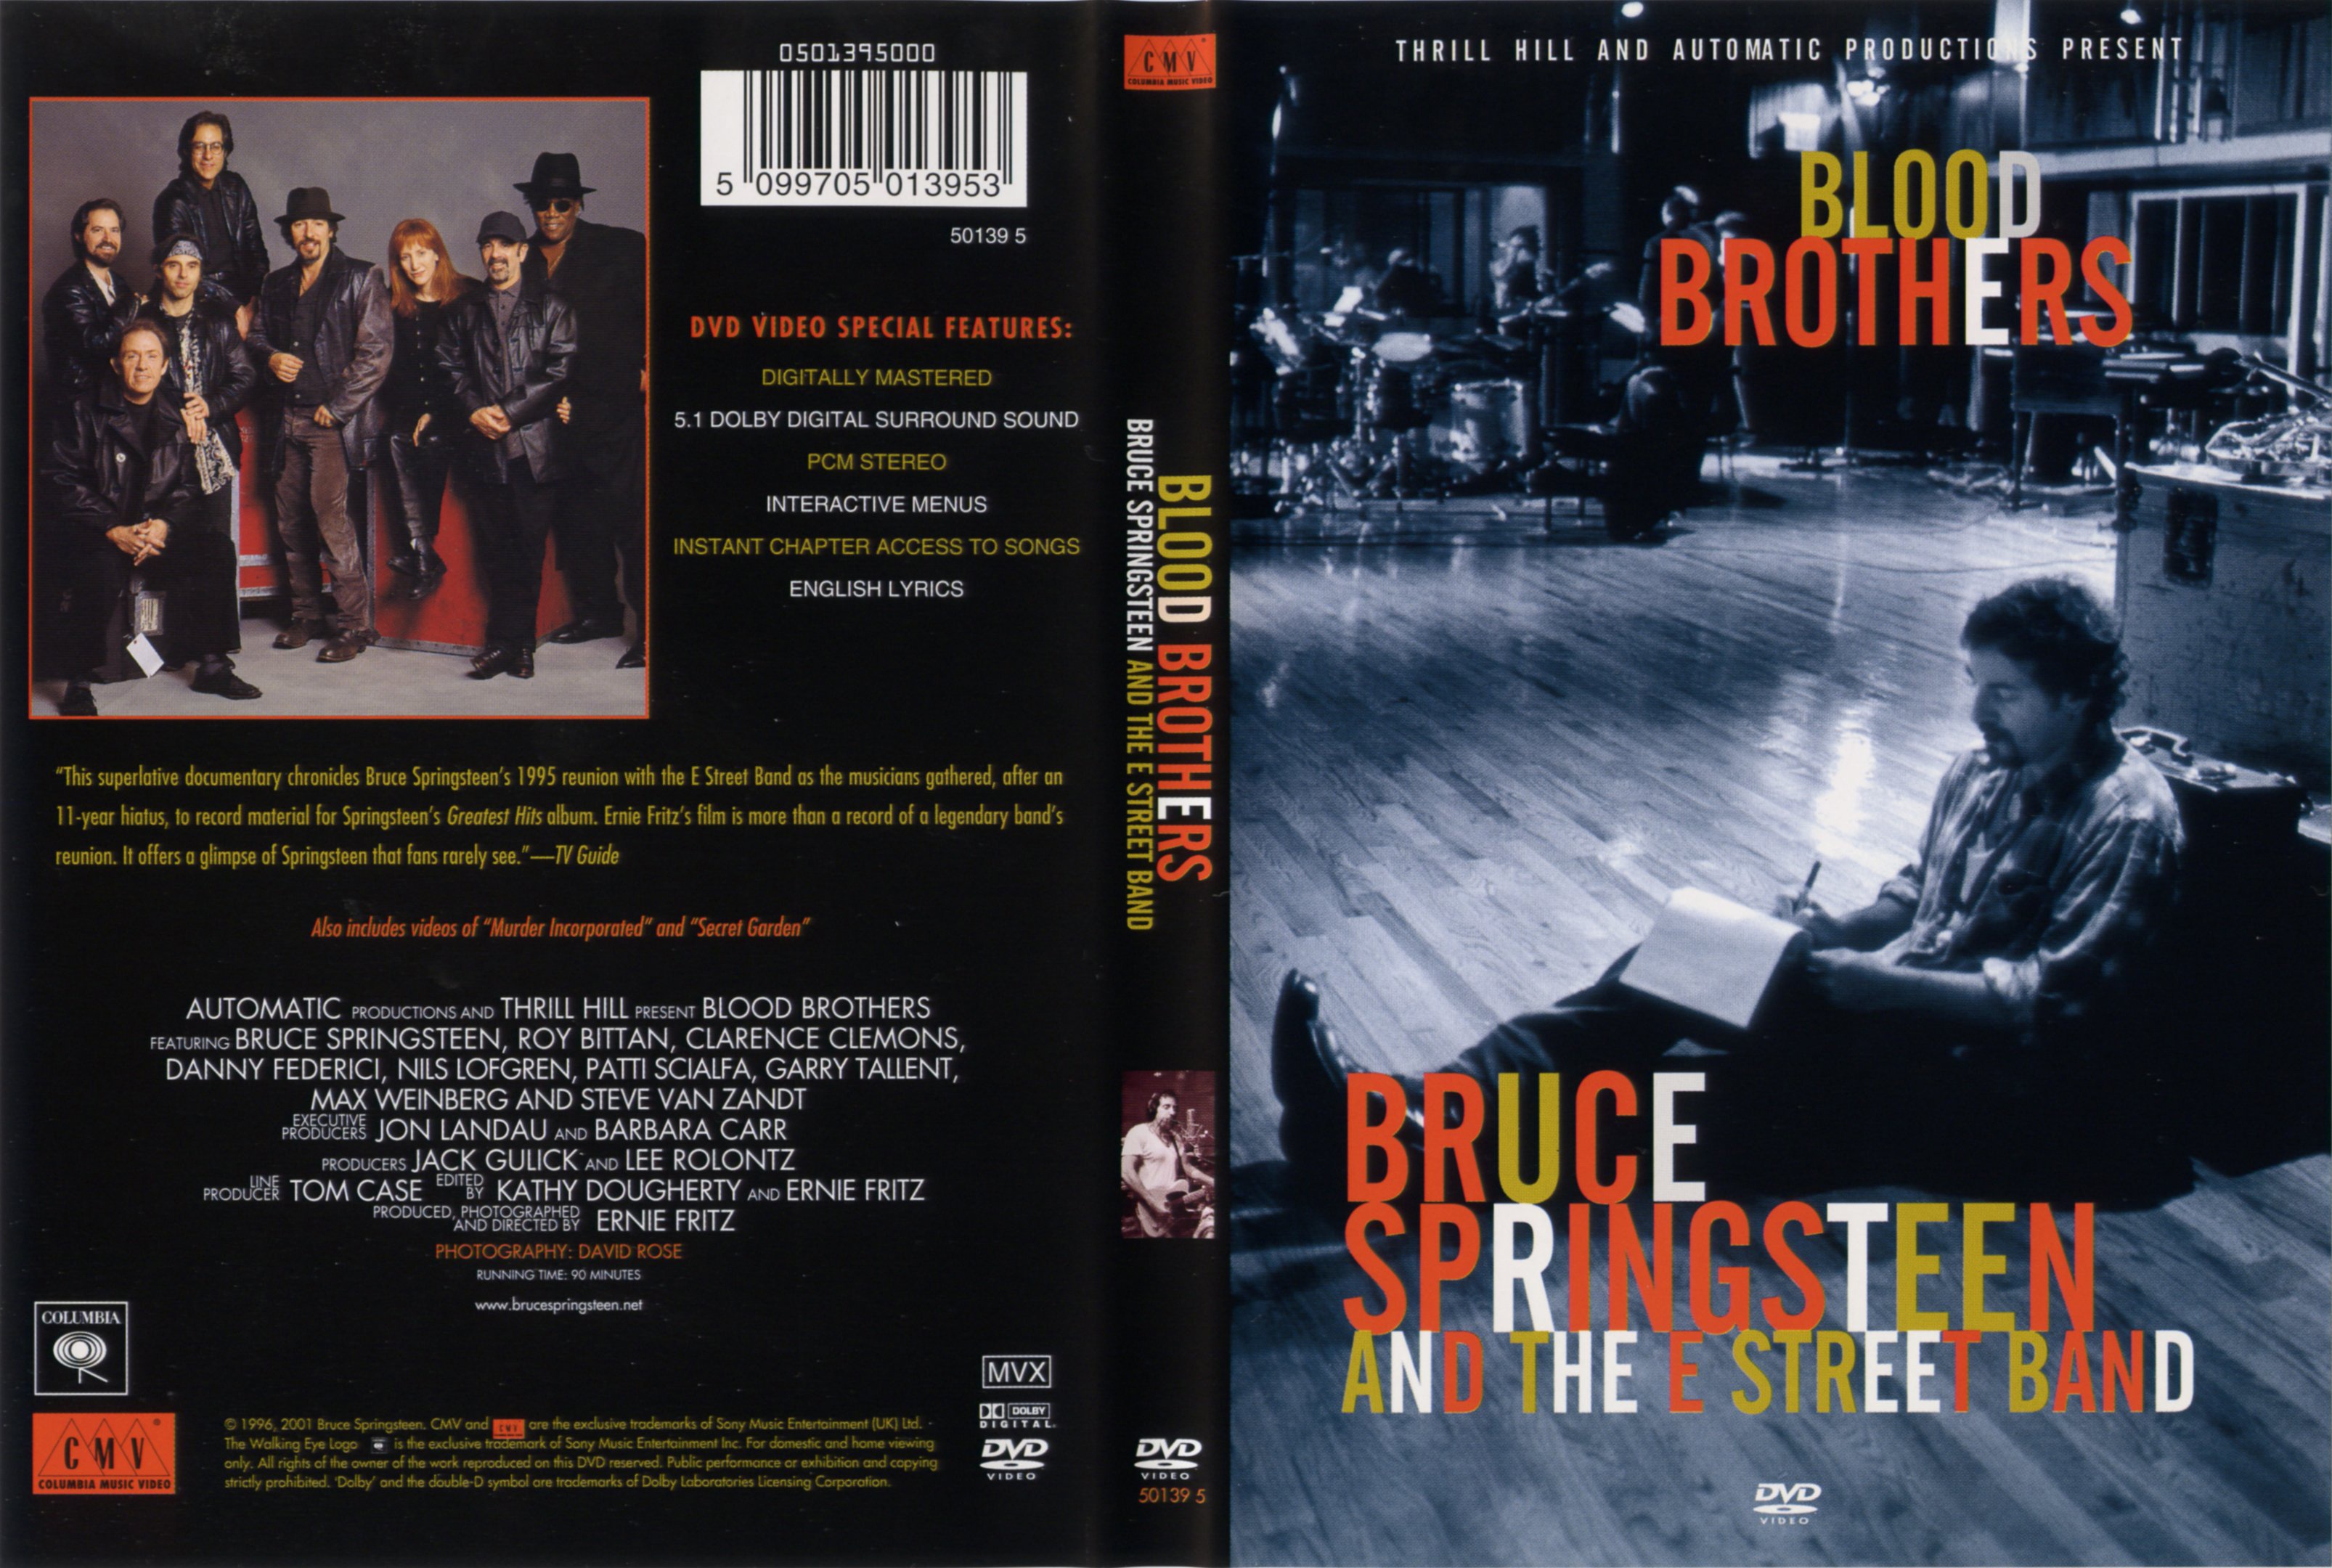 Jaquette DVD Bruce Springsteen Blood brothers